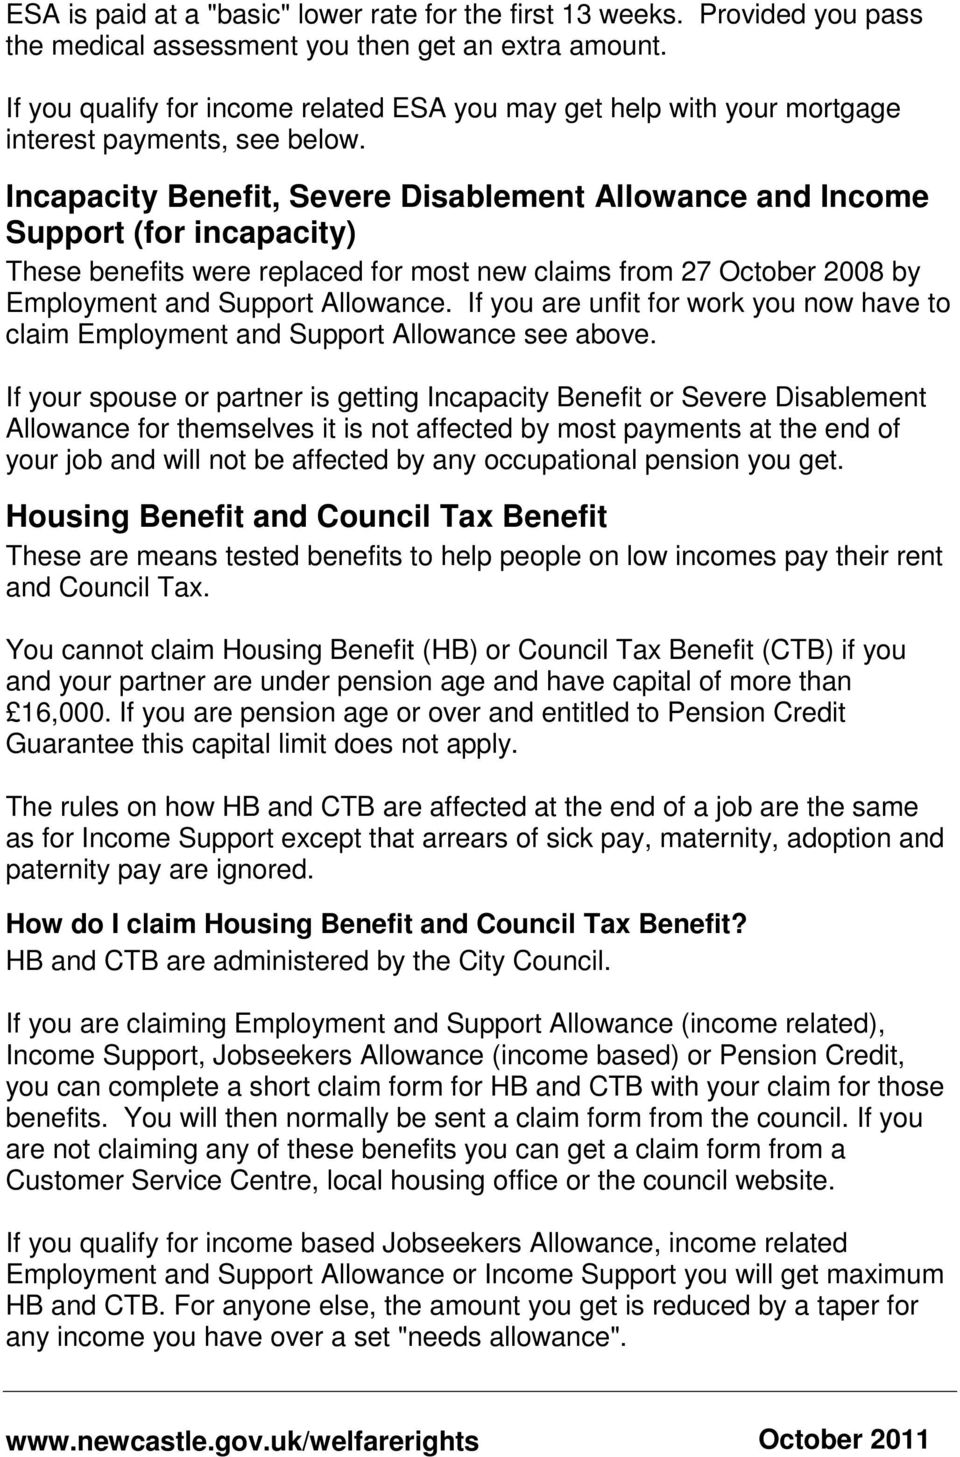 Incapacity Benefit, Severe Disablement Allowance and Income Support (for incapacity) These benefits were replaced for most new claims from 27 October 2008 by Employment and Support Allowance.